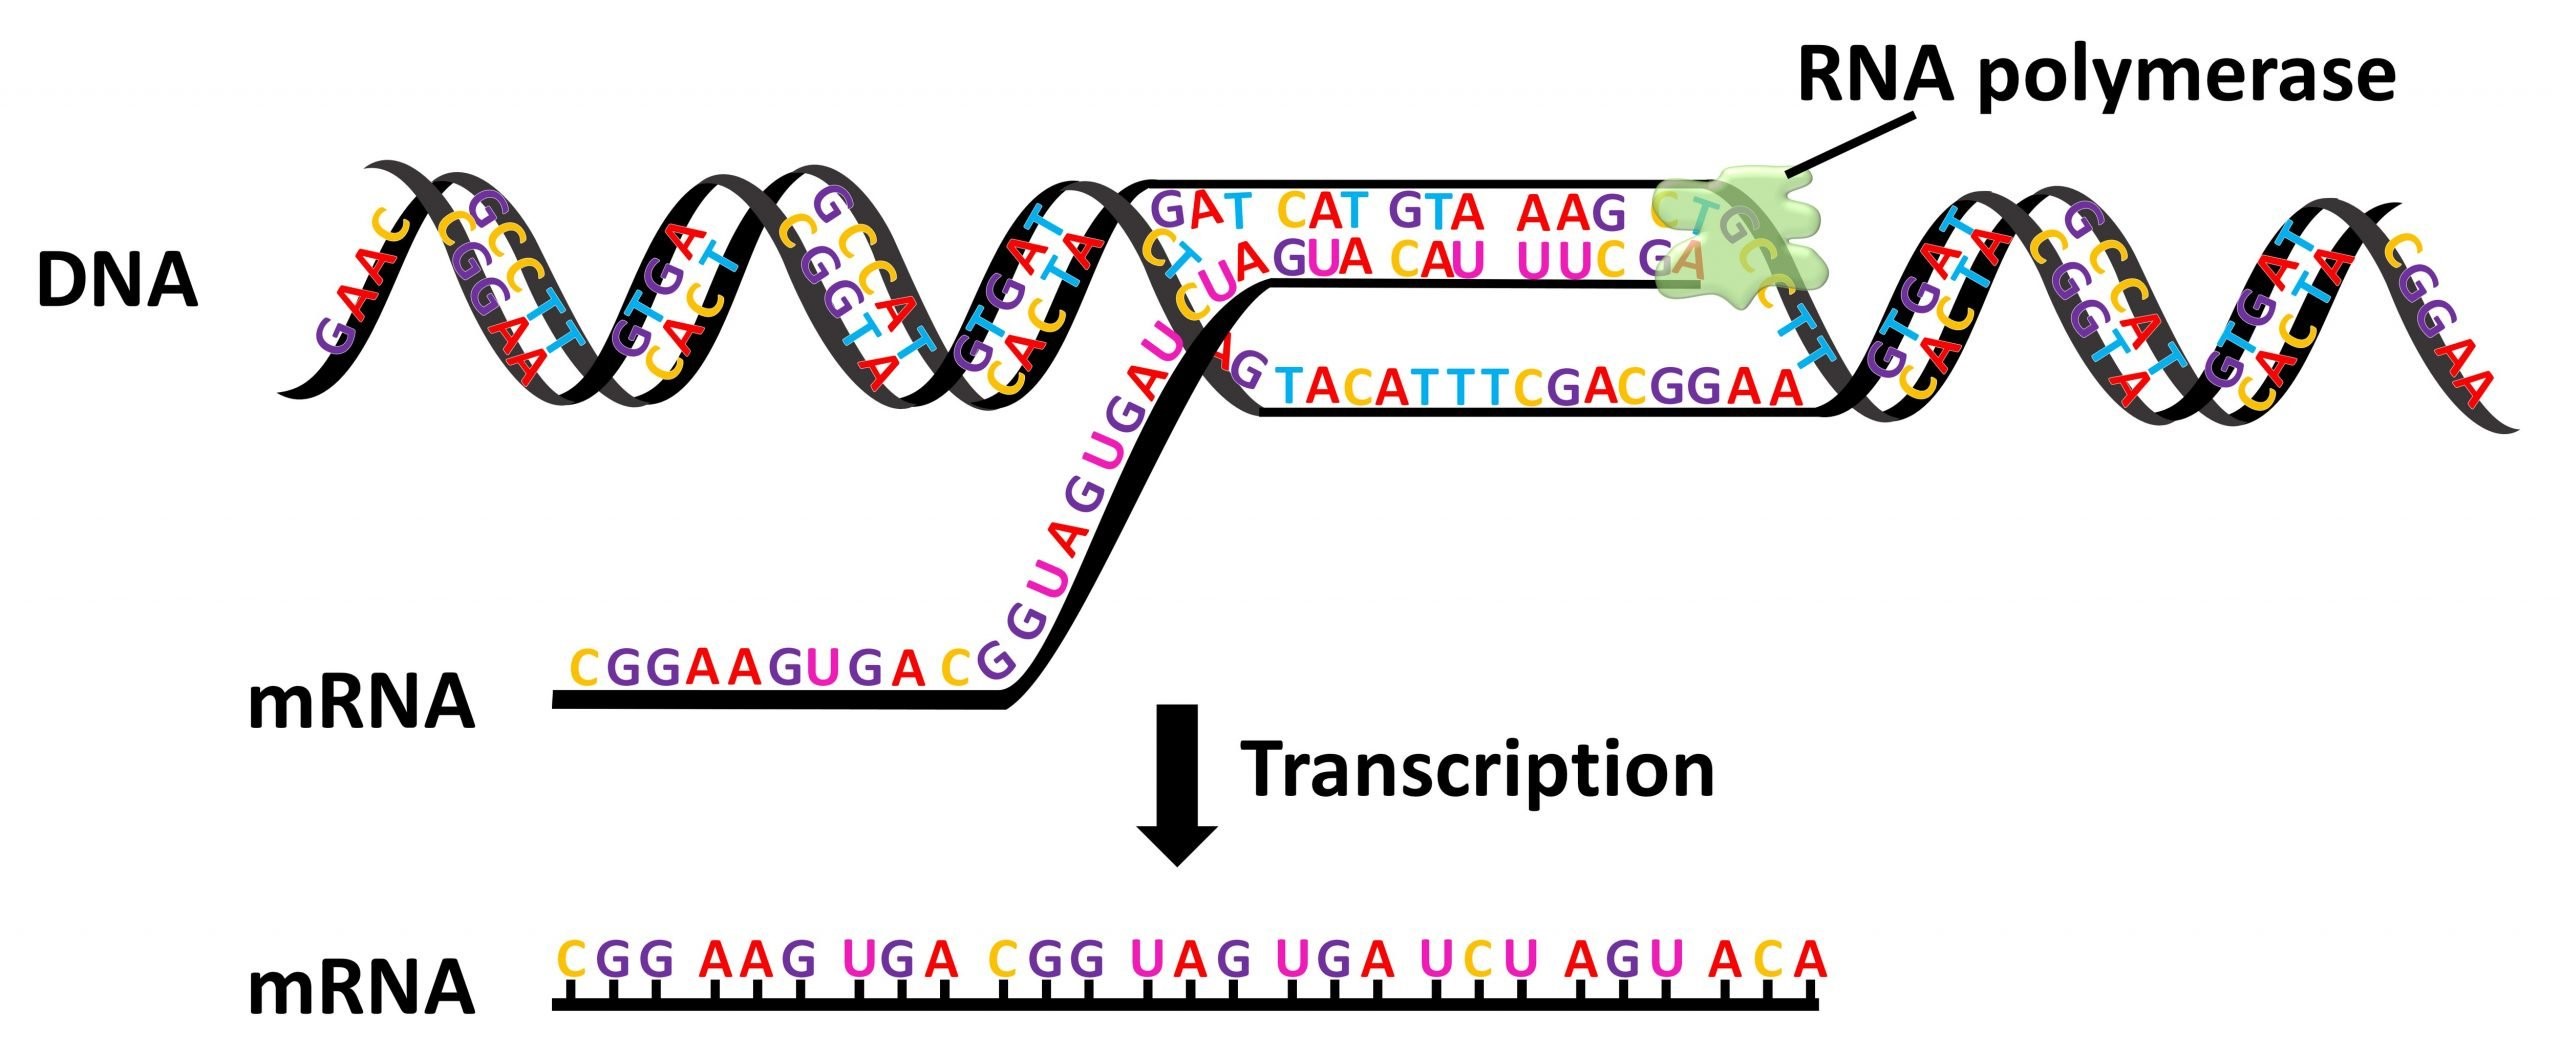 A scientific diagram displaying the process of transcription